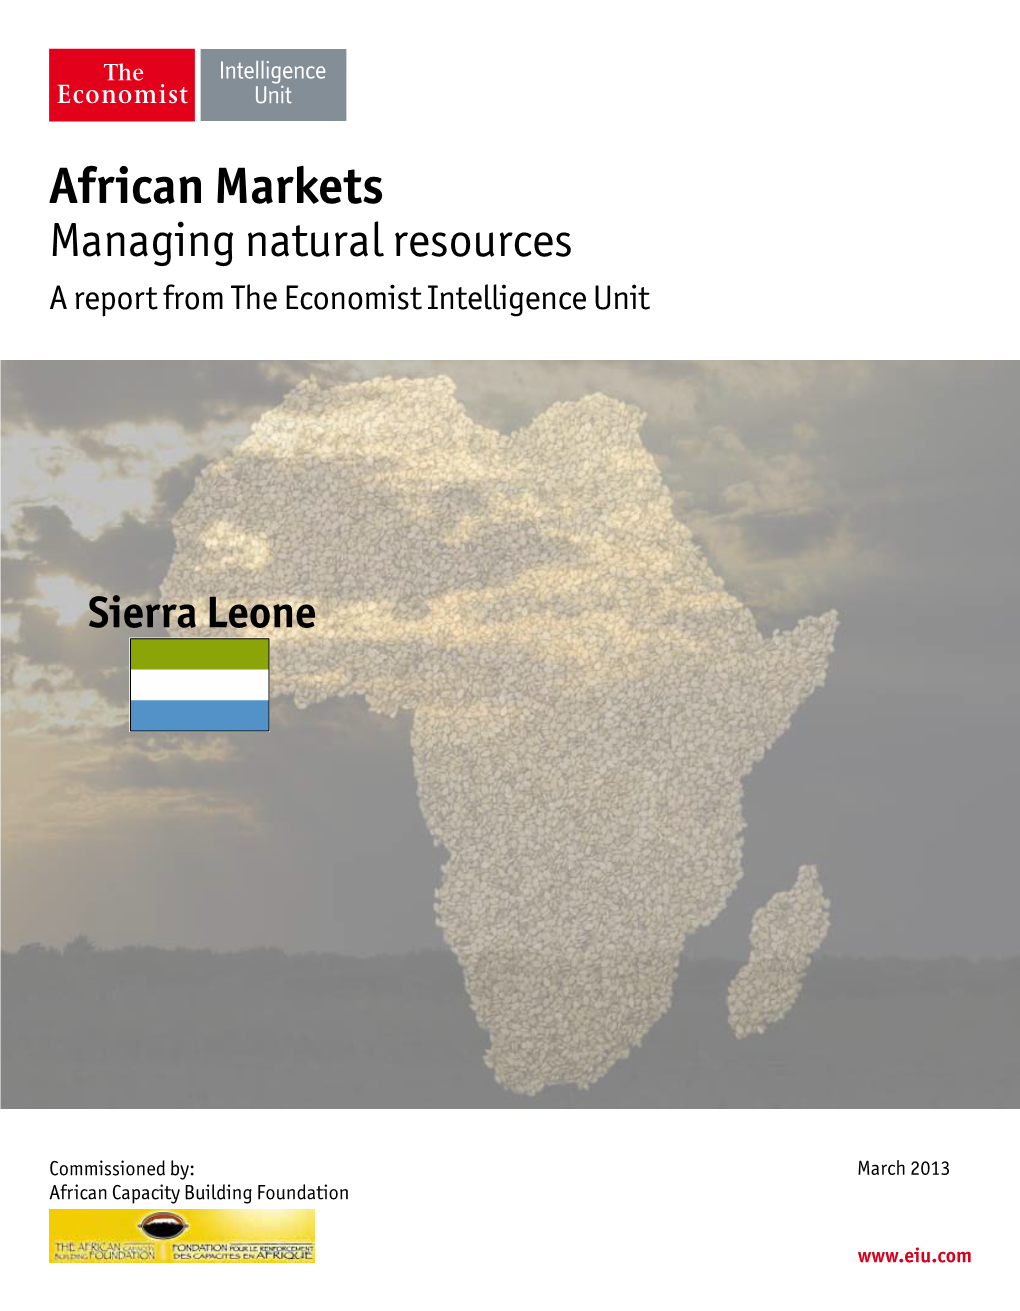 African Markets Managing Natural Resources a Report from the Economist Intelligence Unit